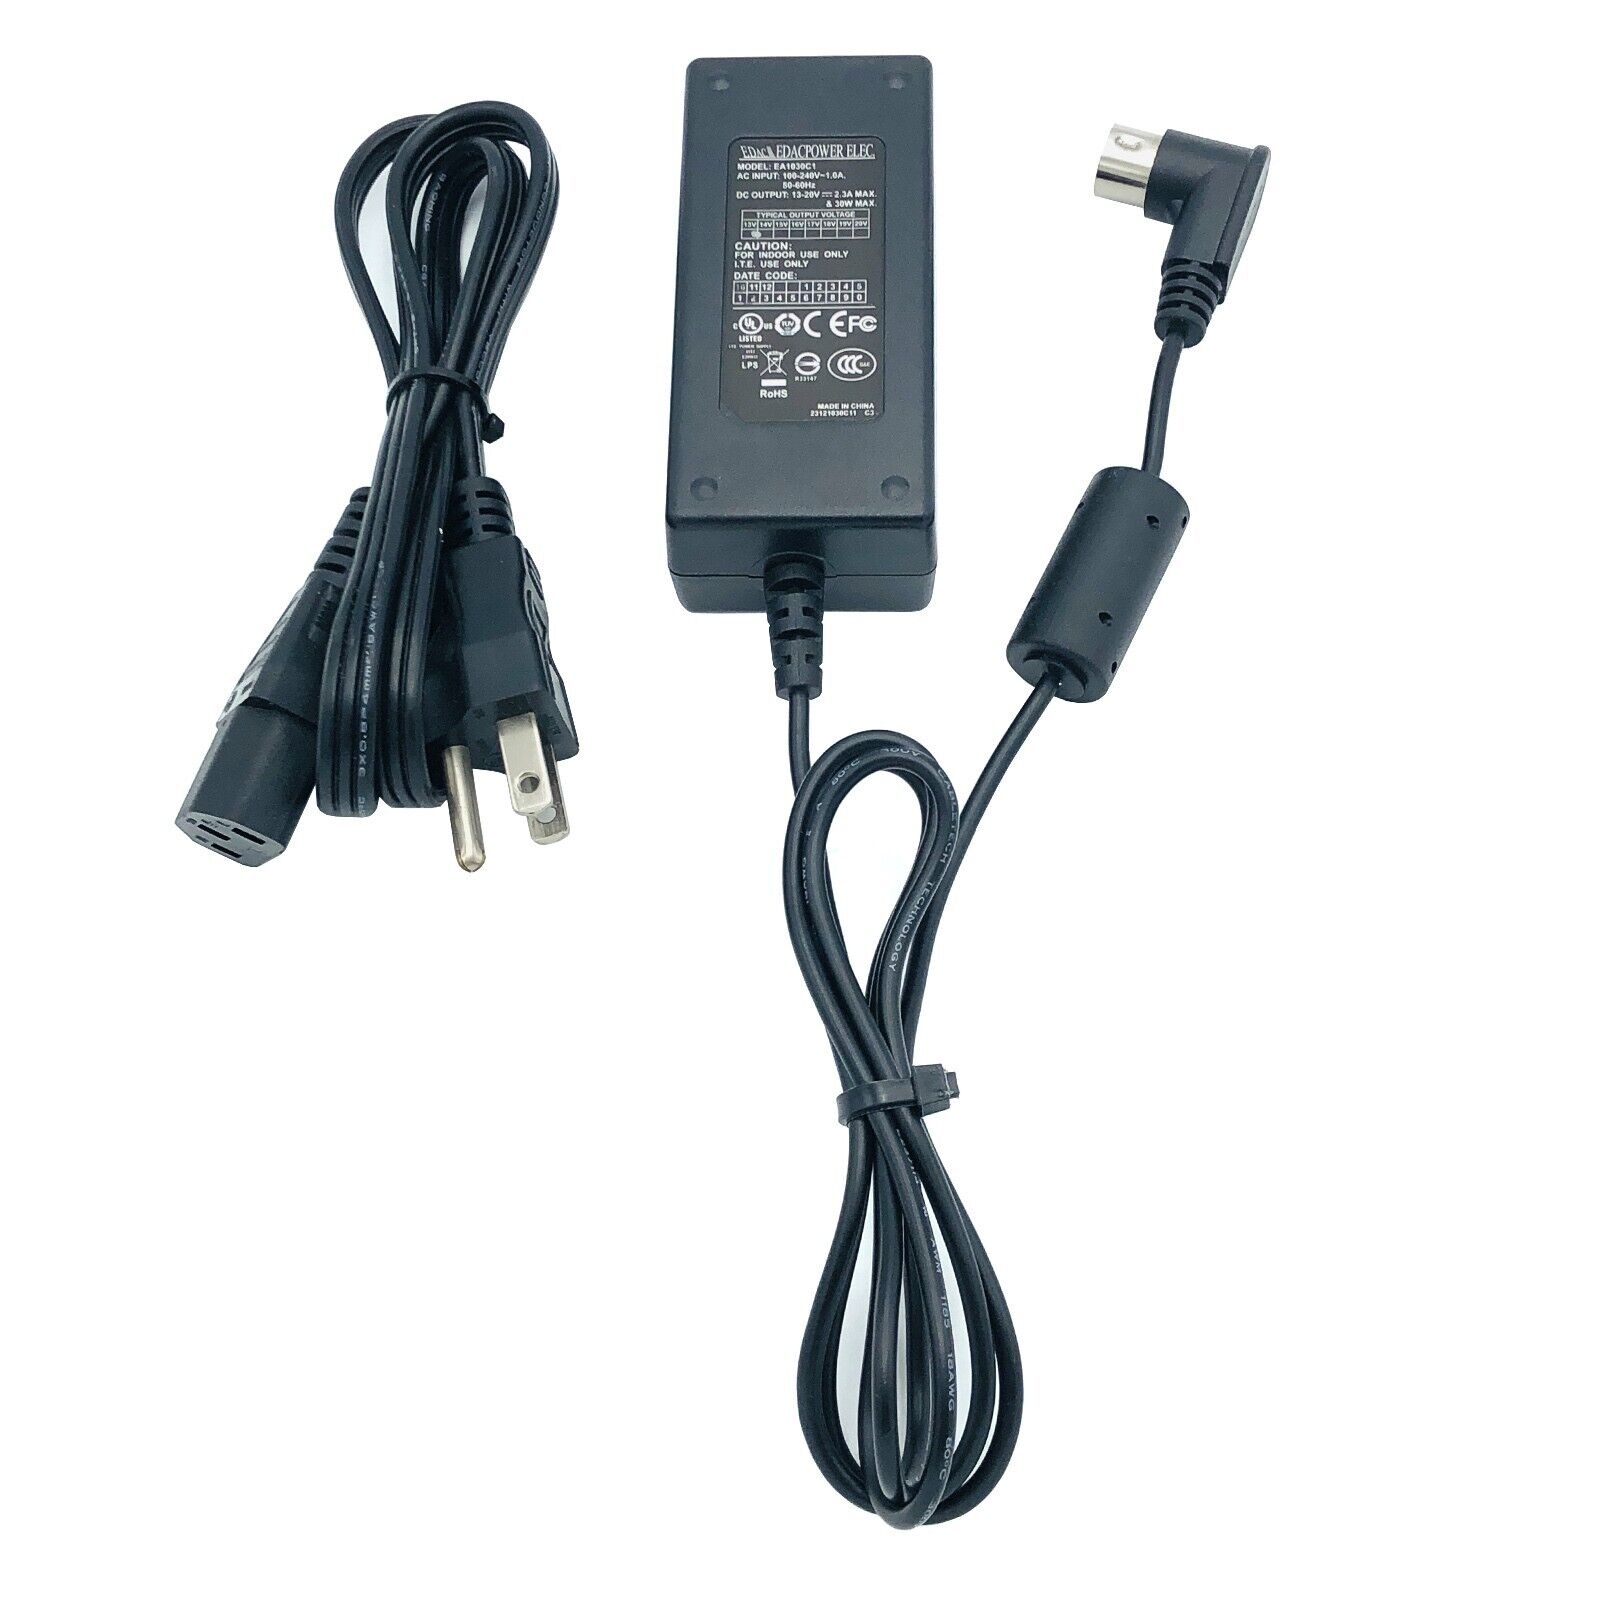 Genuine Edac EA1030C1 AC Adapter Power Supply 13-20V 2.3A 4Pin Connector w/Cord